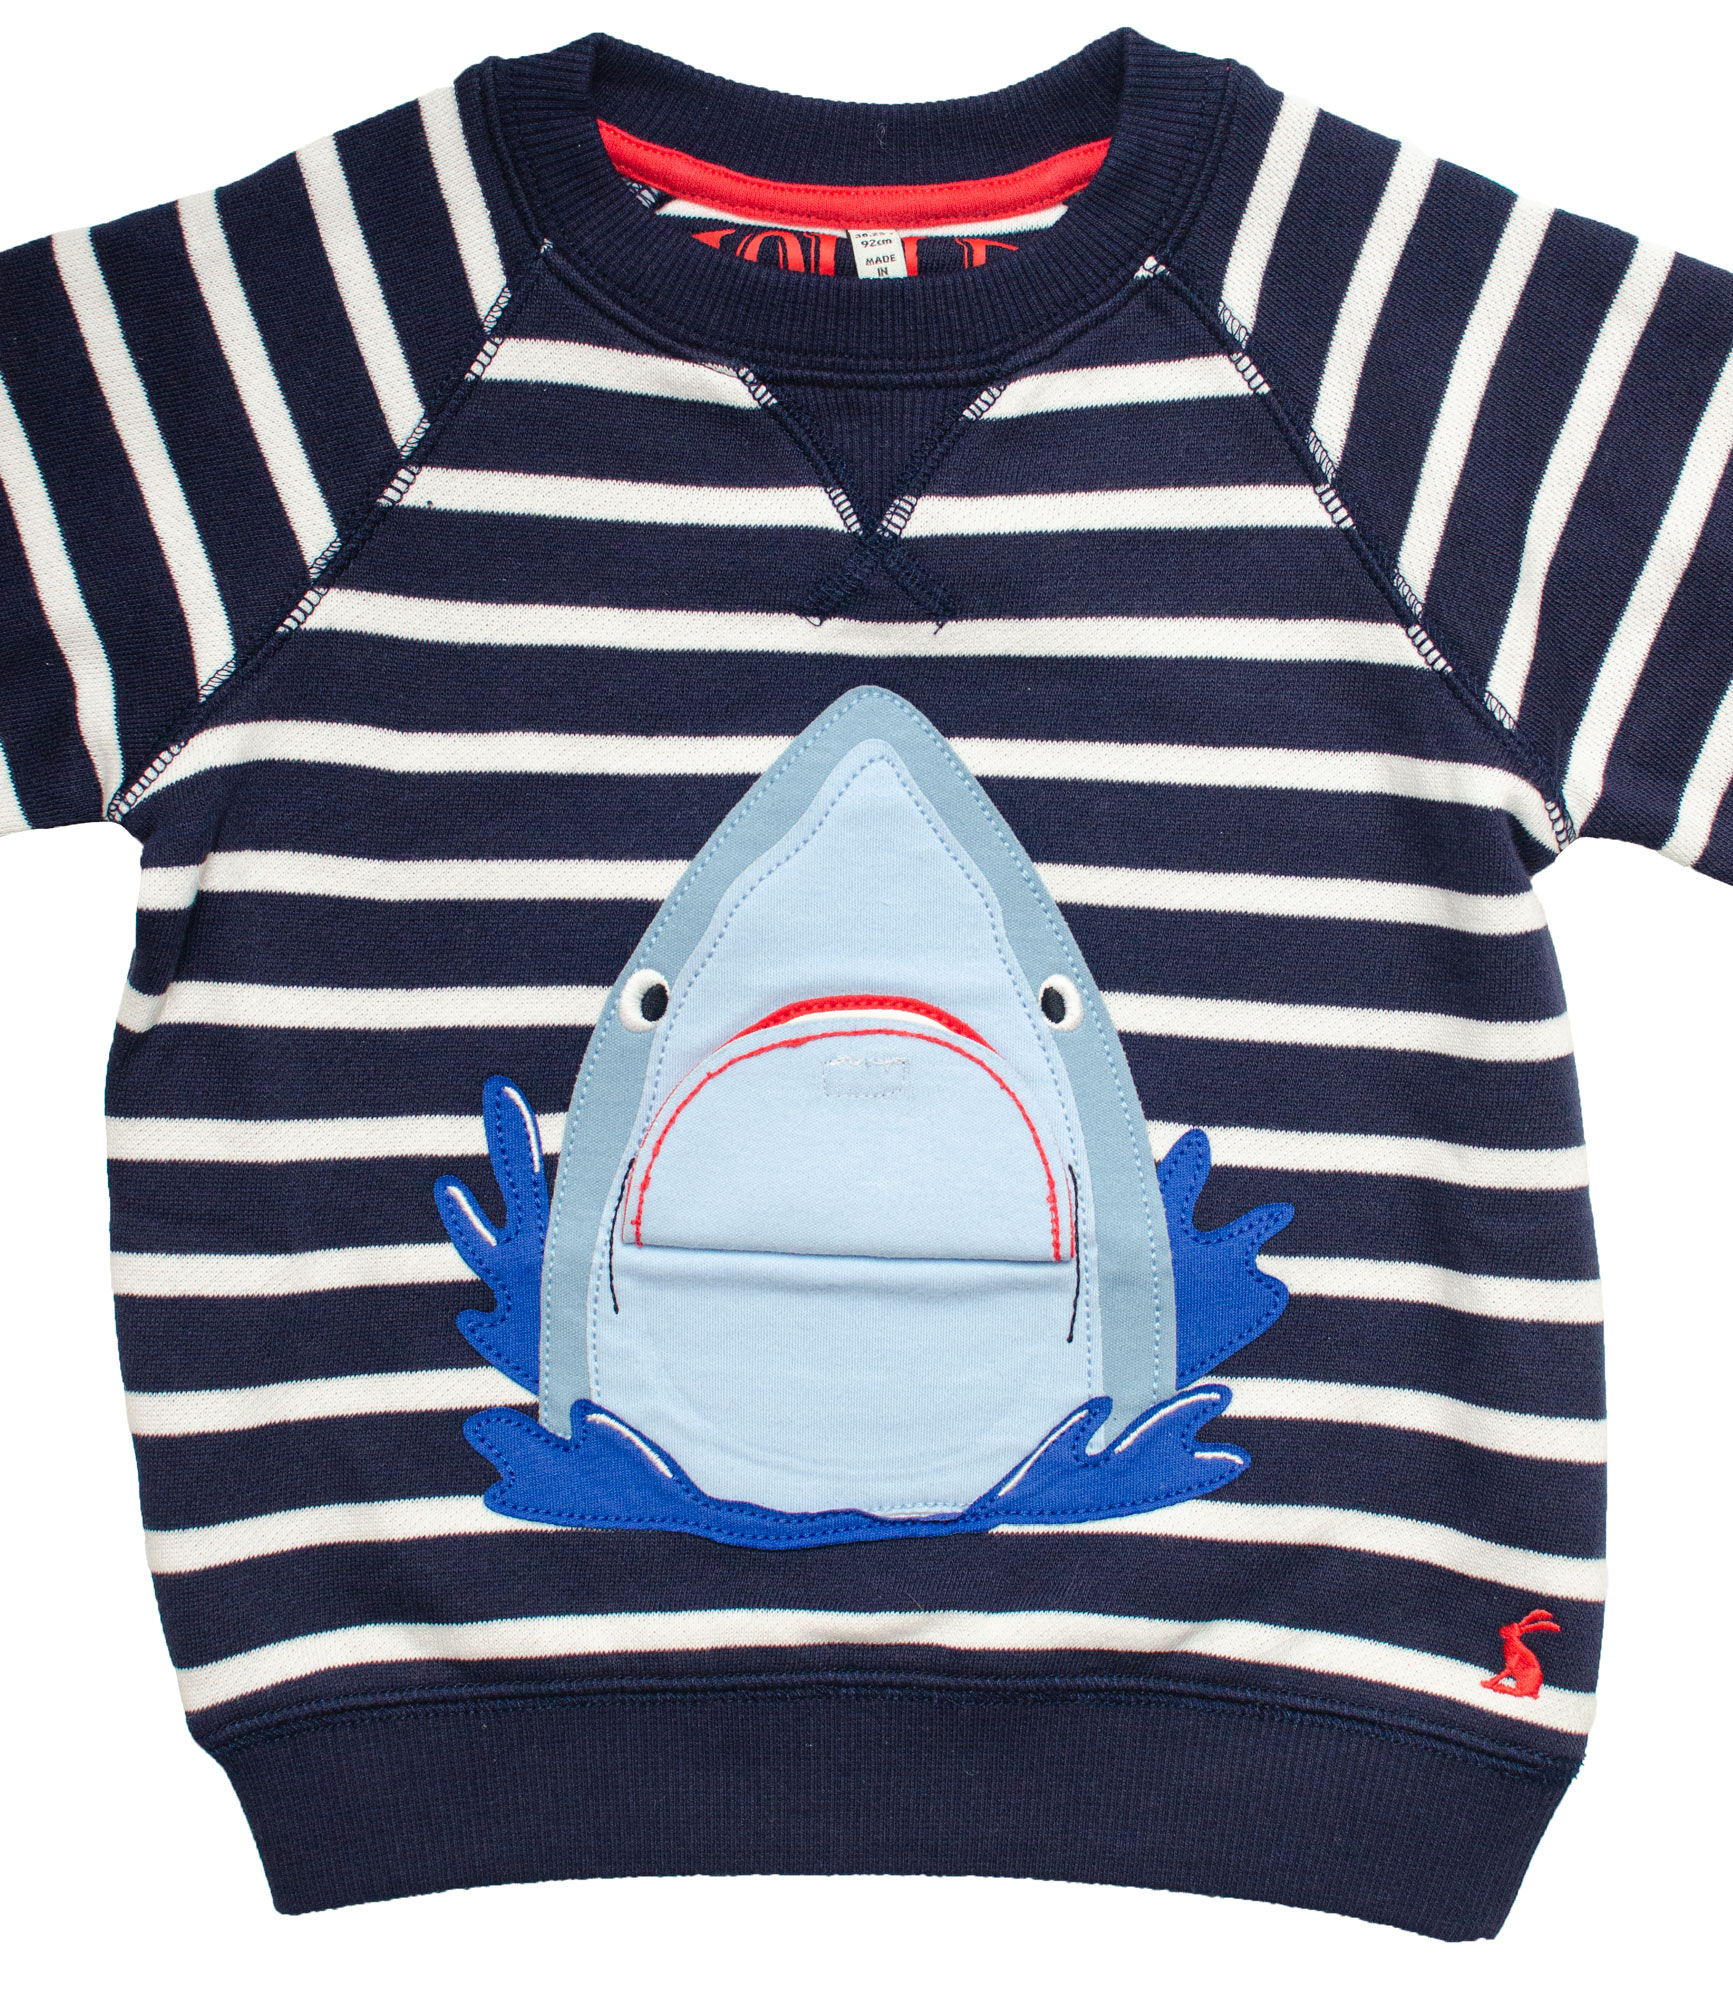 Shark chomp t-shirt illustration by Elly Jahnz for Joules